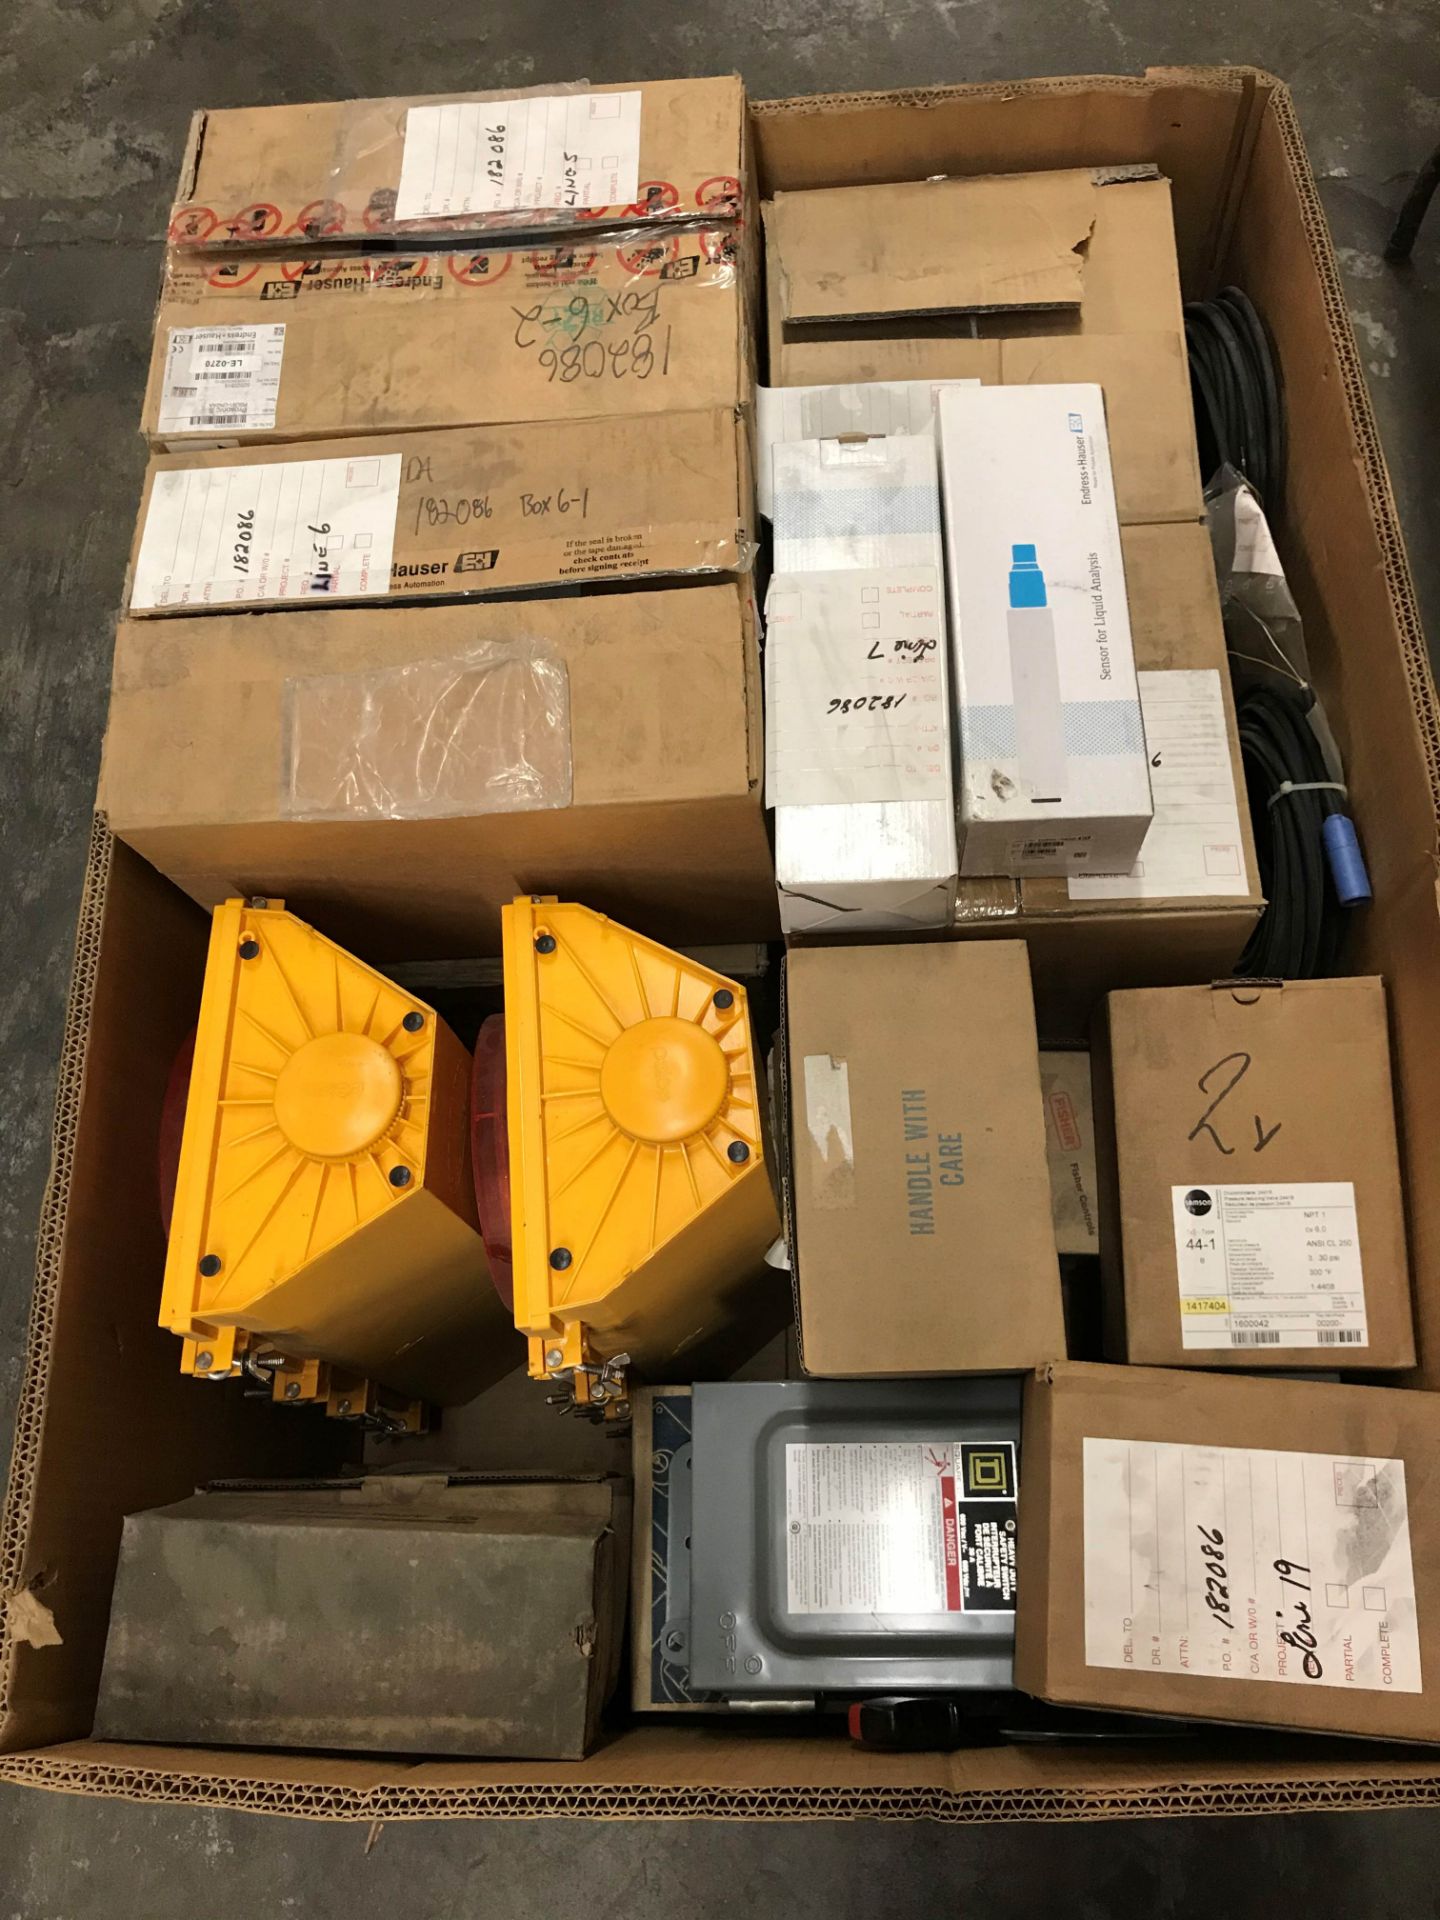 LOT/ SKID WITH ELECTRICAL & INSTRUMENTATION COMPONENTS - INCLUDING PUSH BUTTON STARTERS, SENSORS,